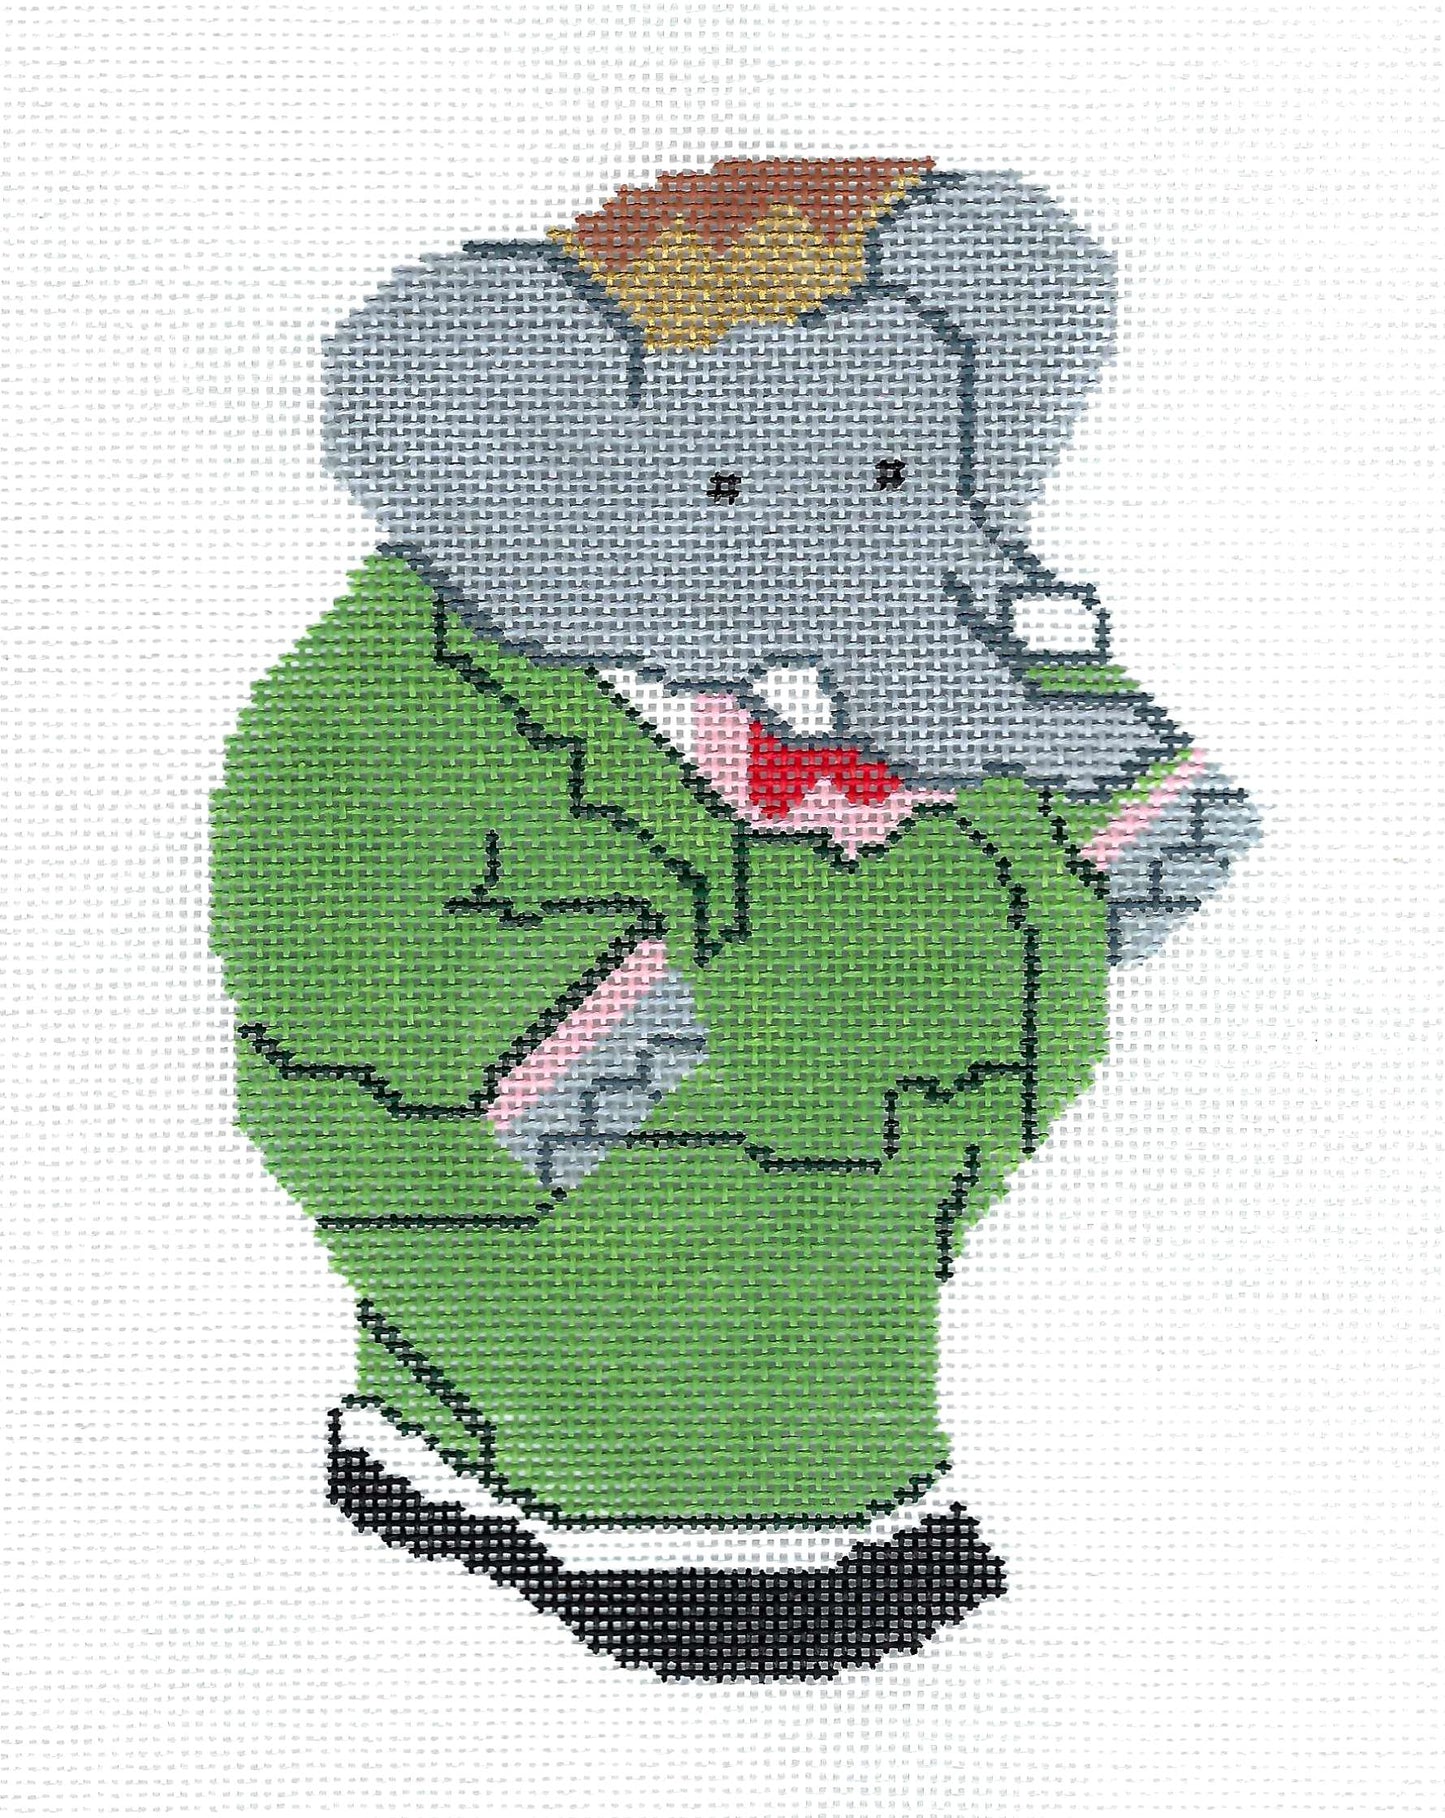 Child's ~ Babar the Elephant 18 Mesh handpainted Needlepoint Canvas Ornament by Silver Needle